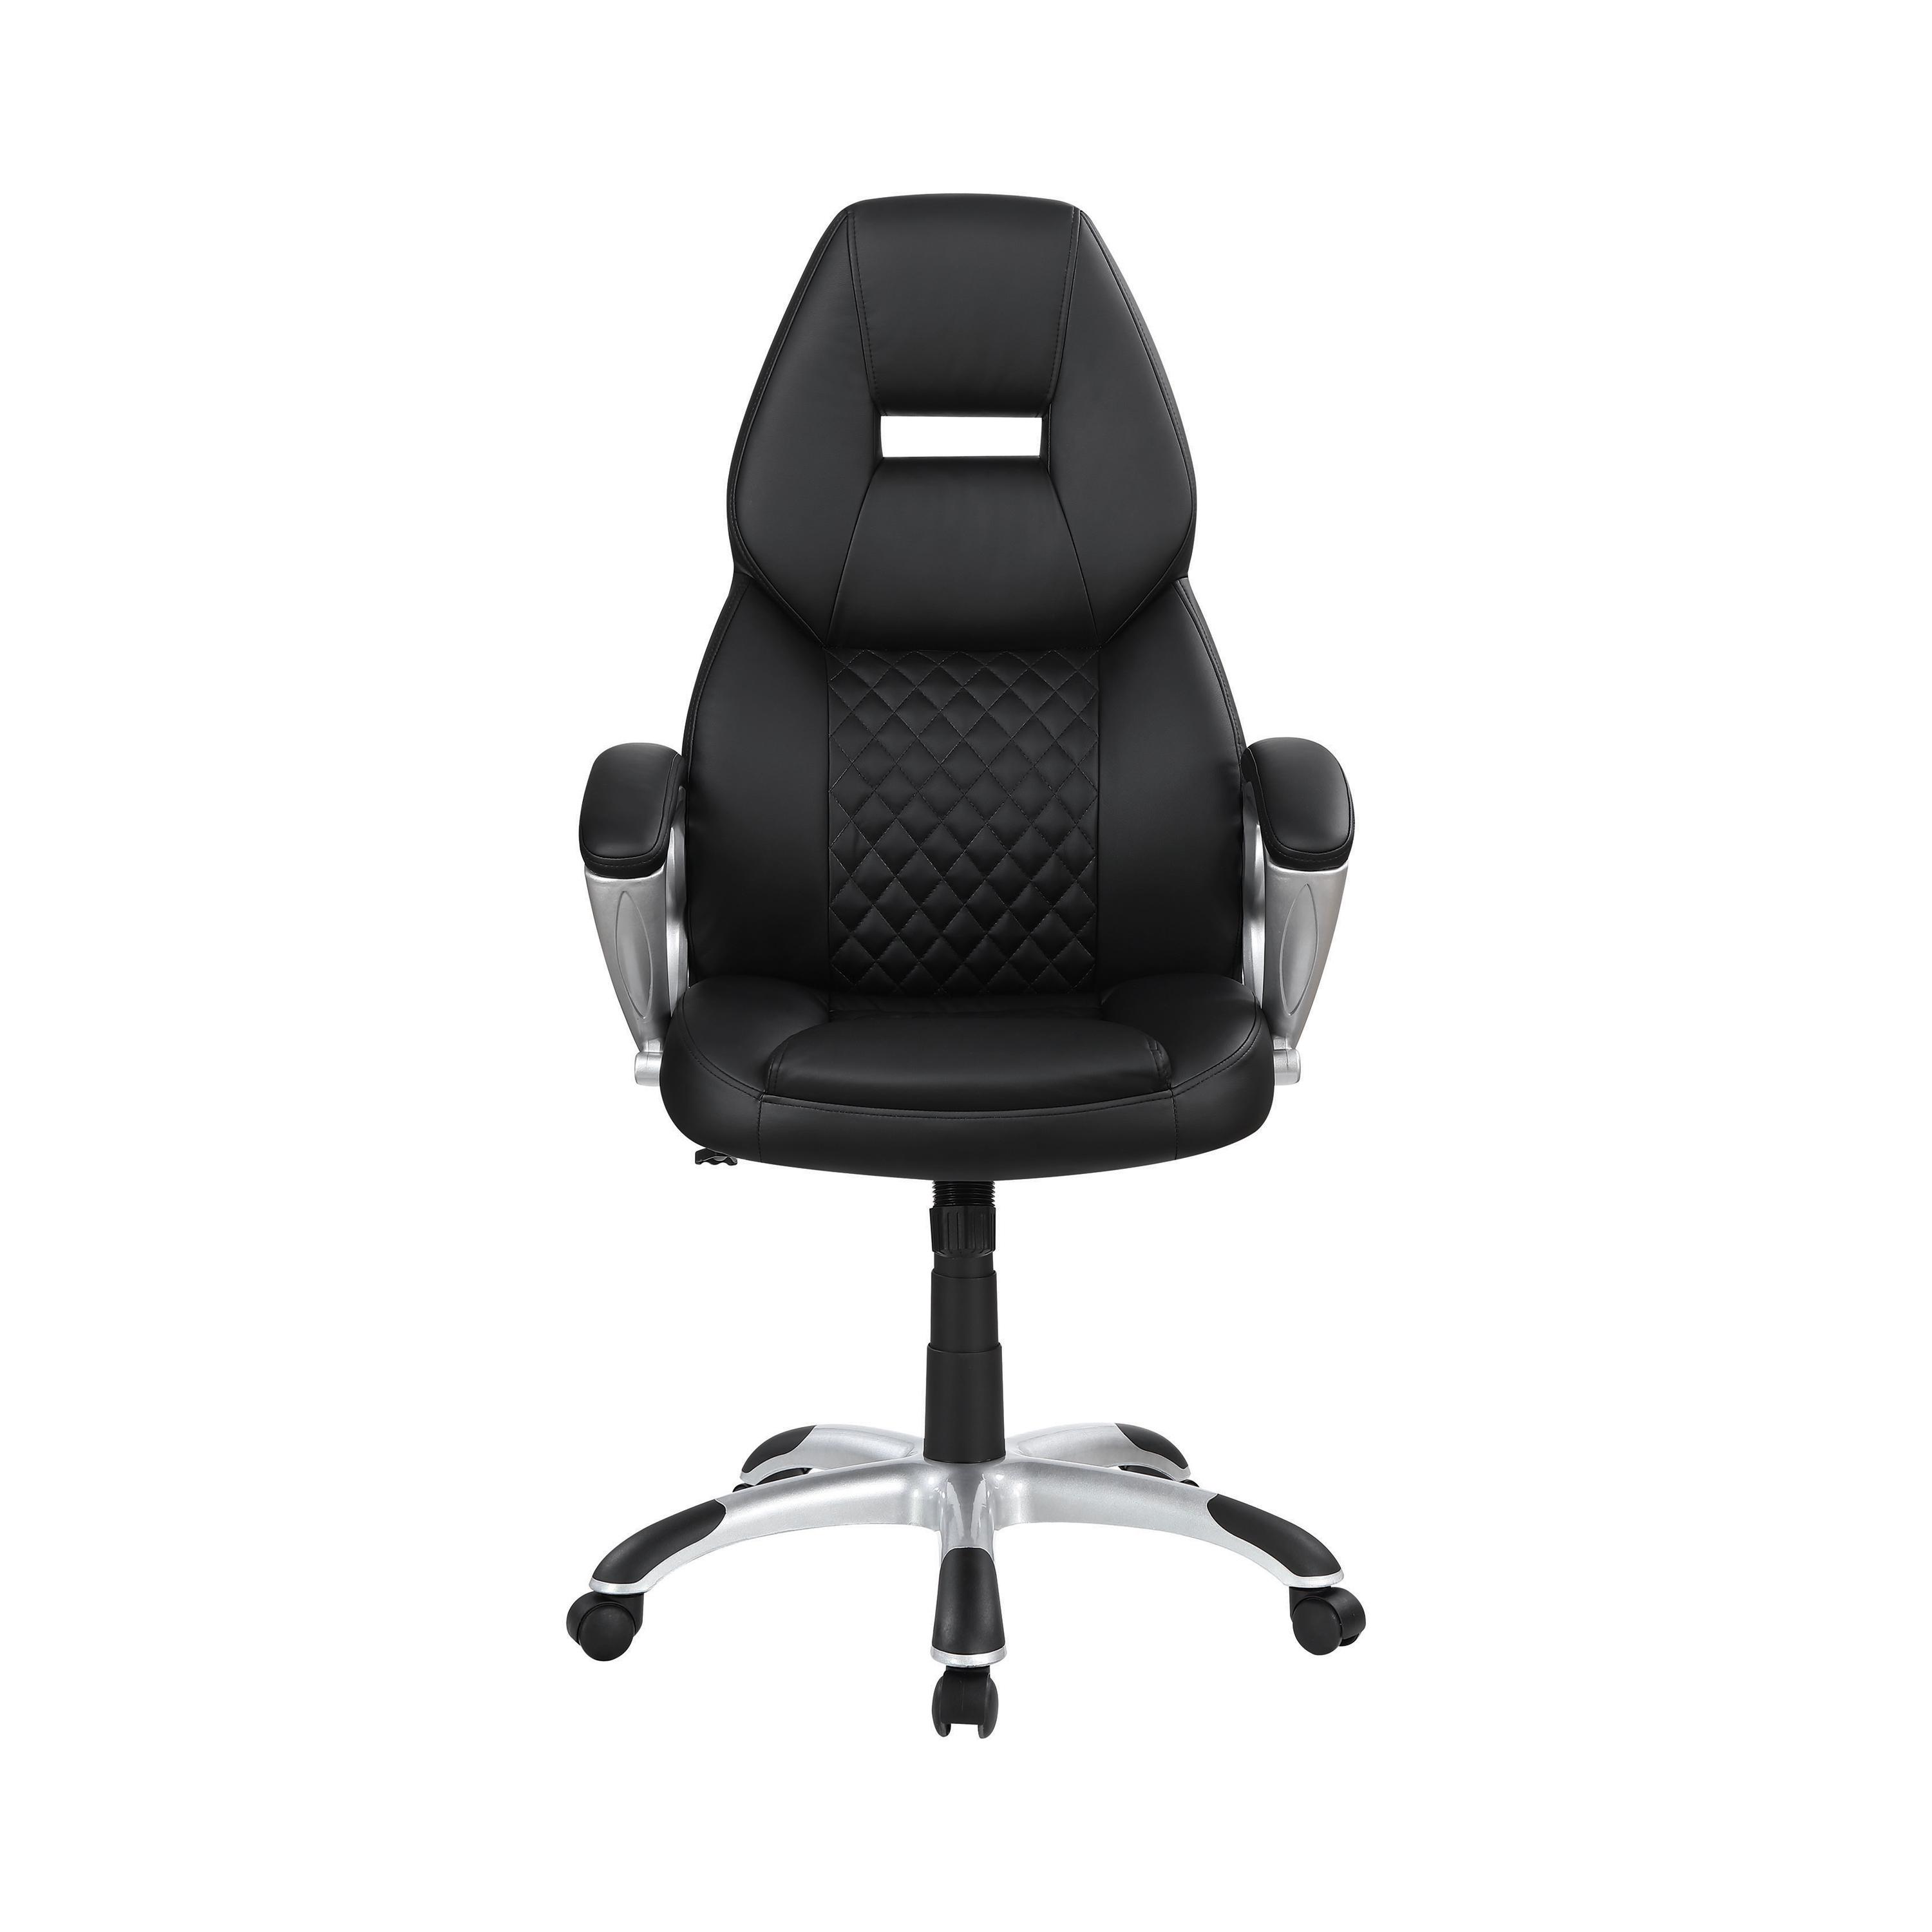 Contemporary Office Chair 801296 801296 in Black Leatherette